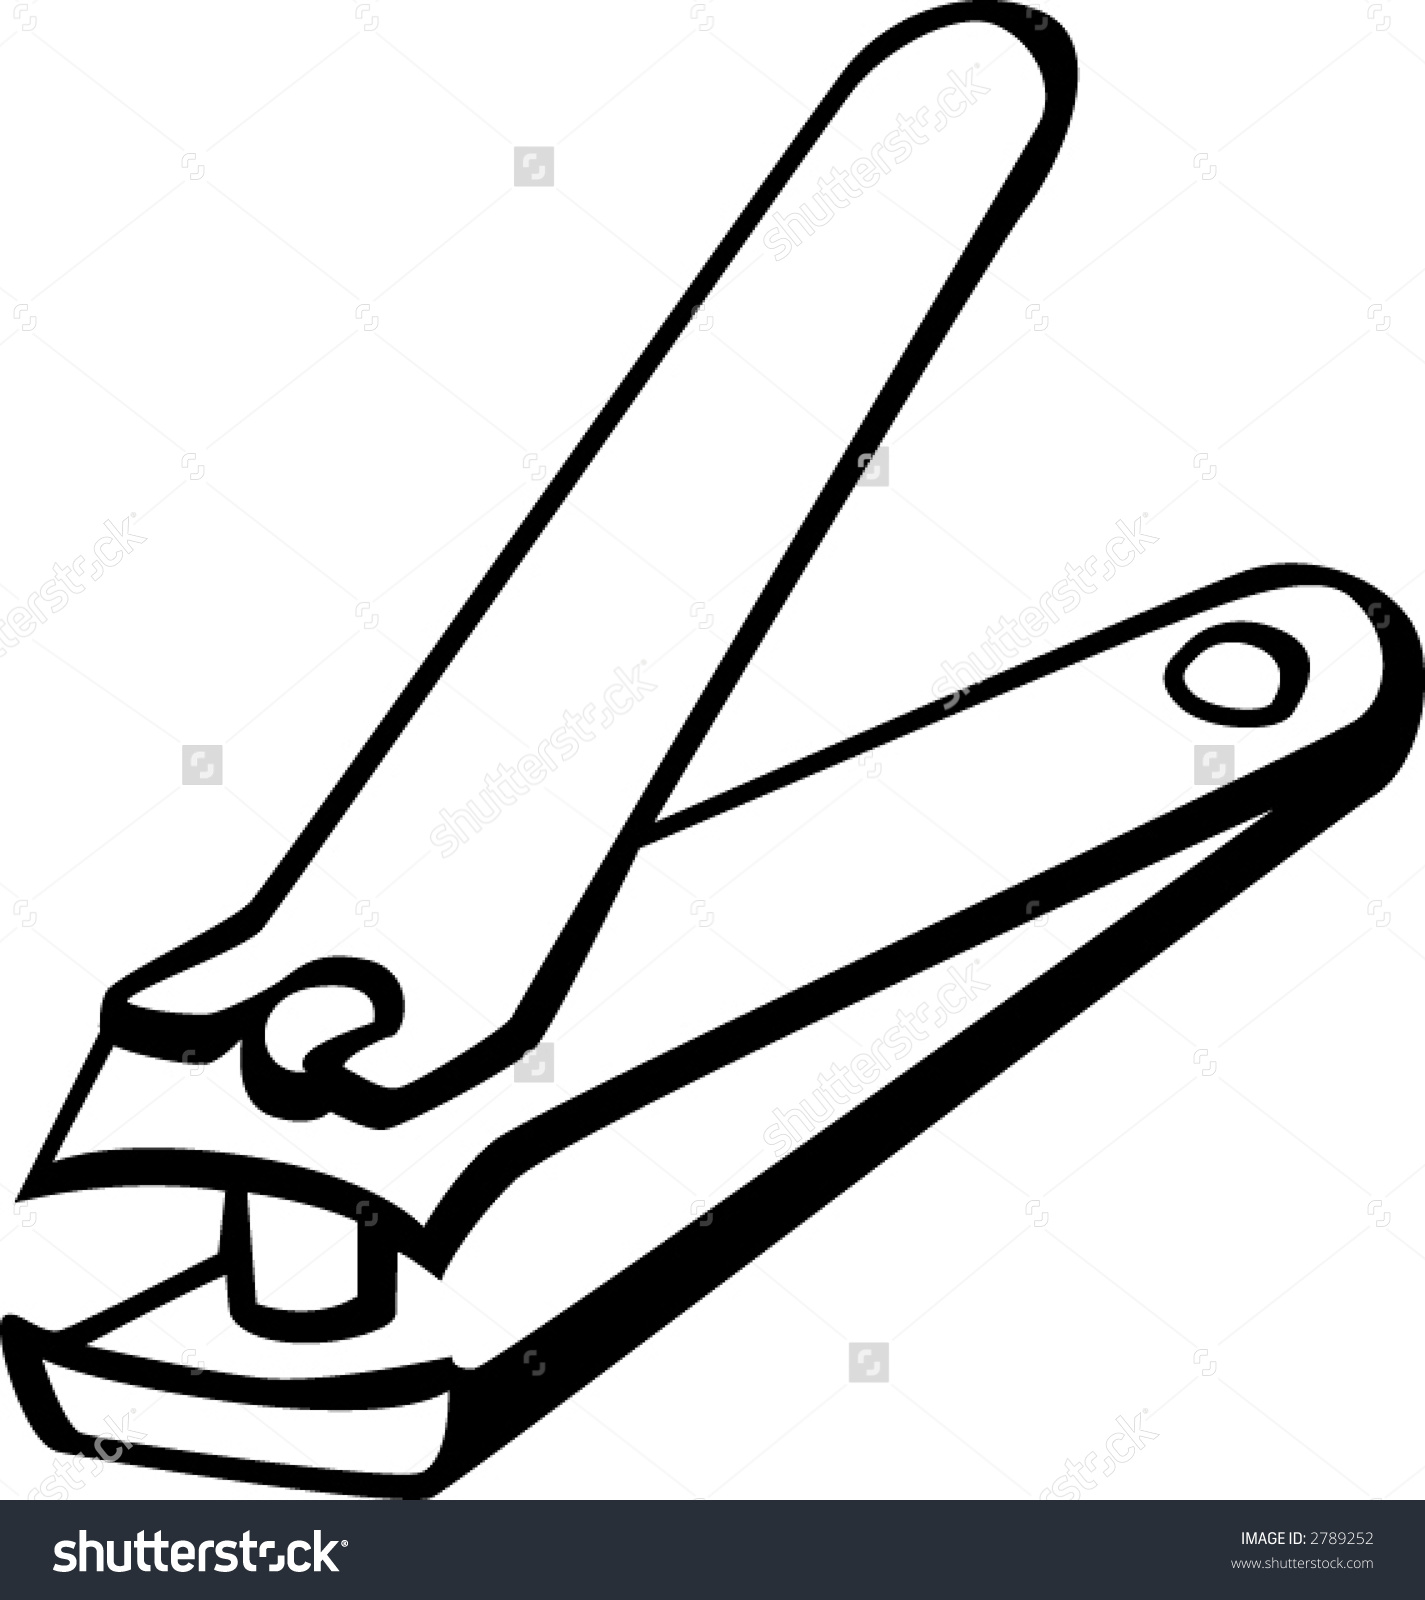 Nail Clippers Clipart.